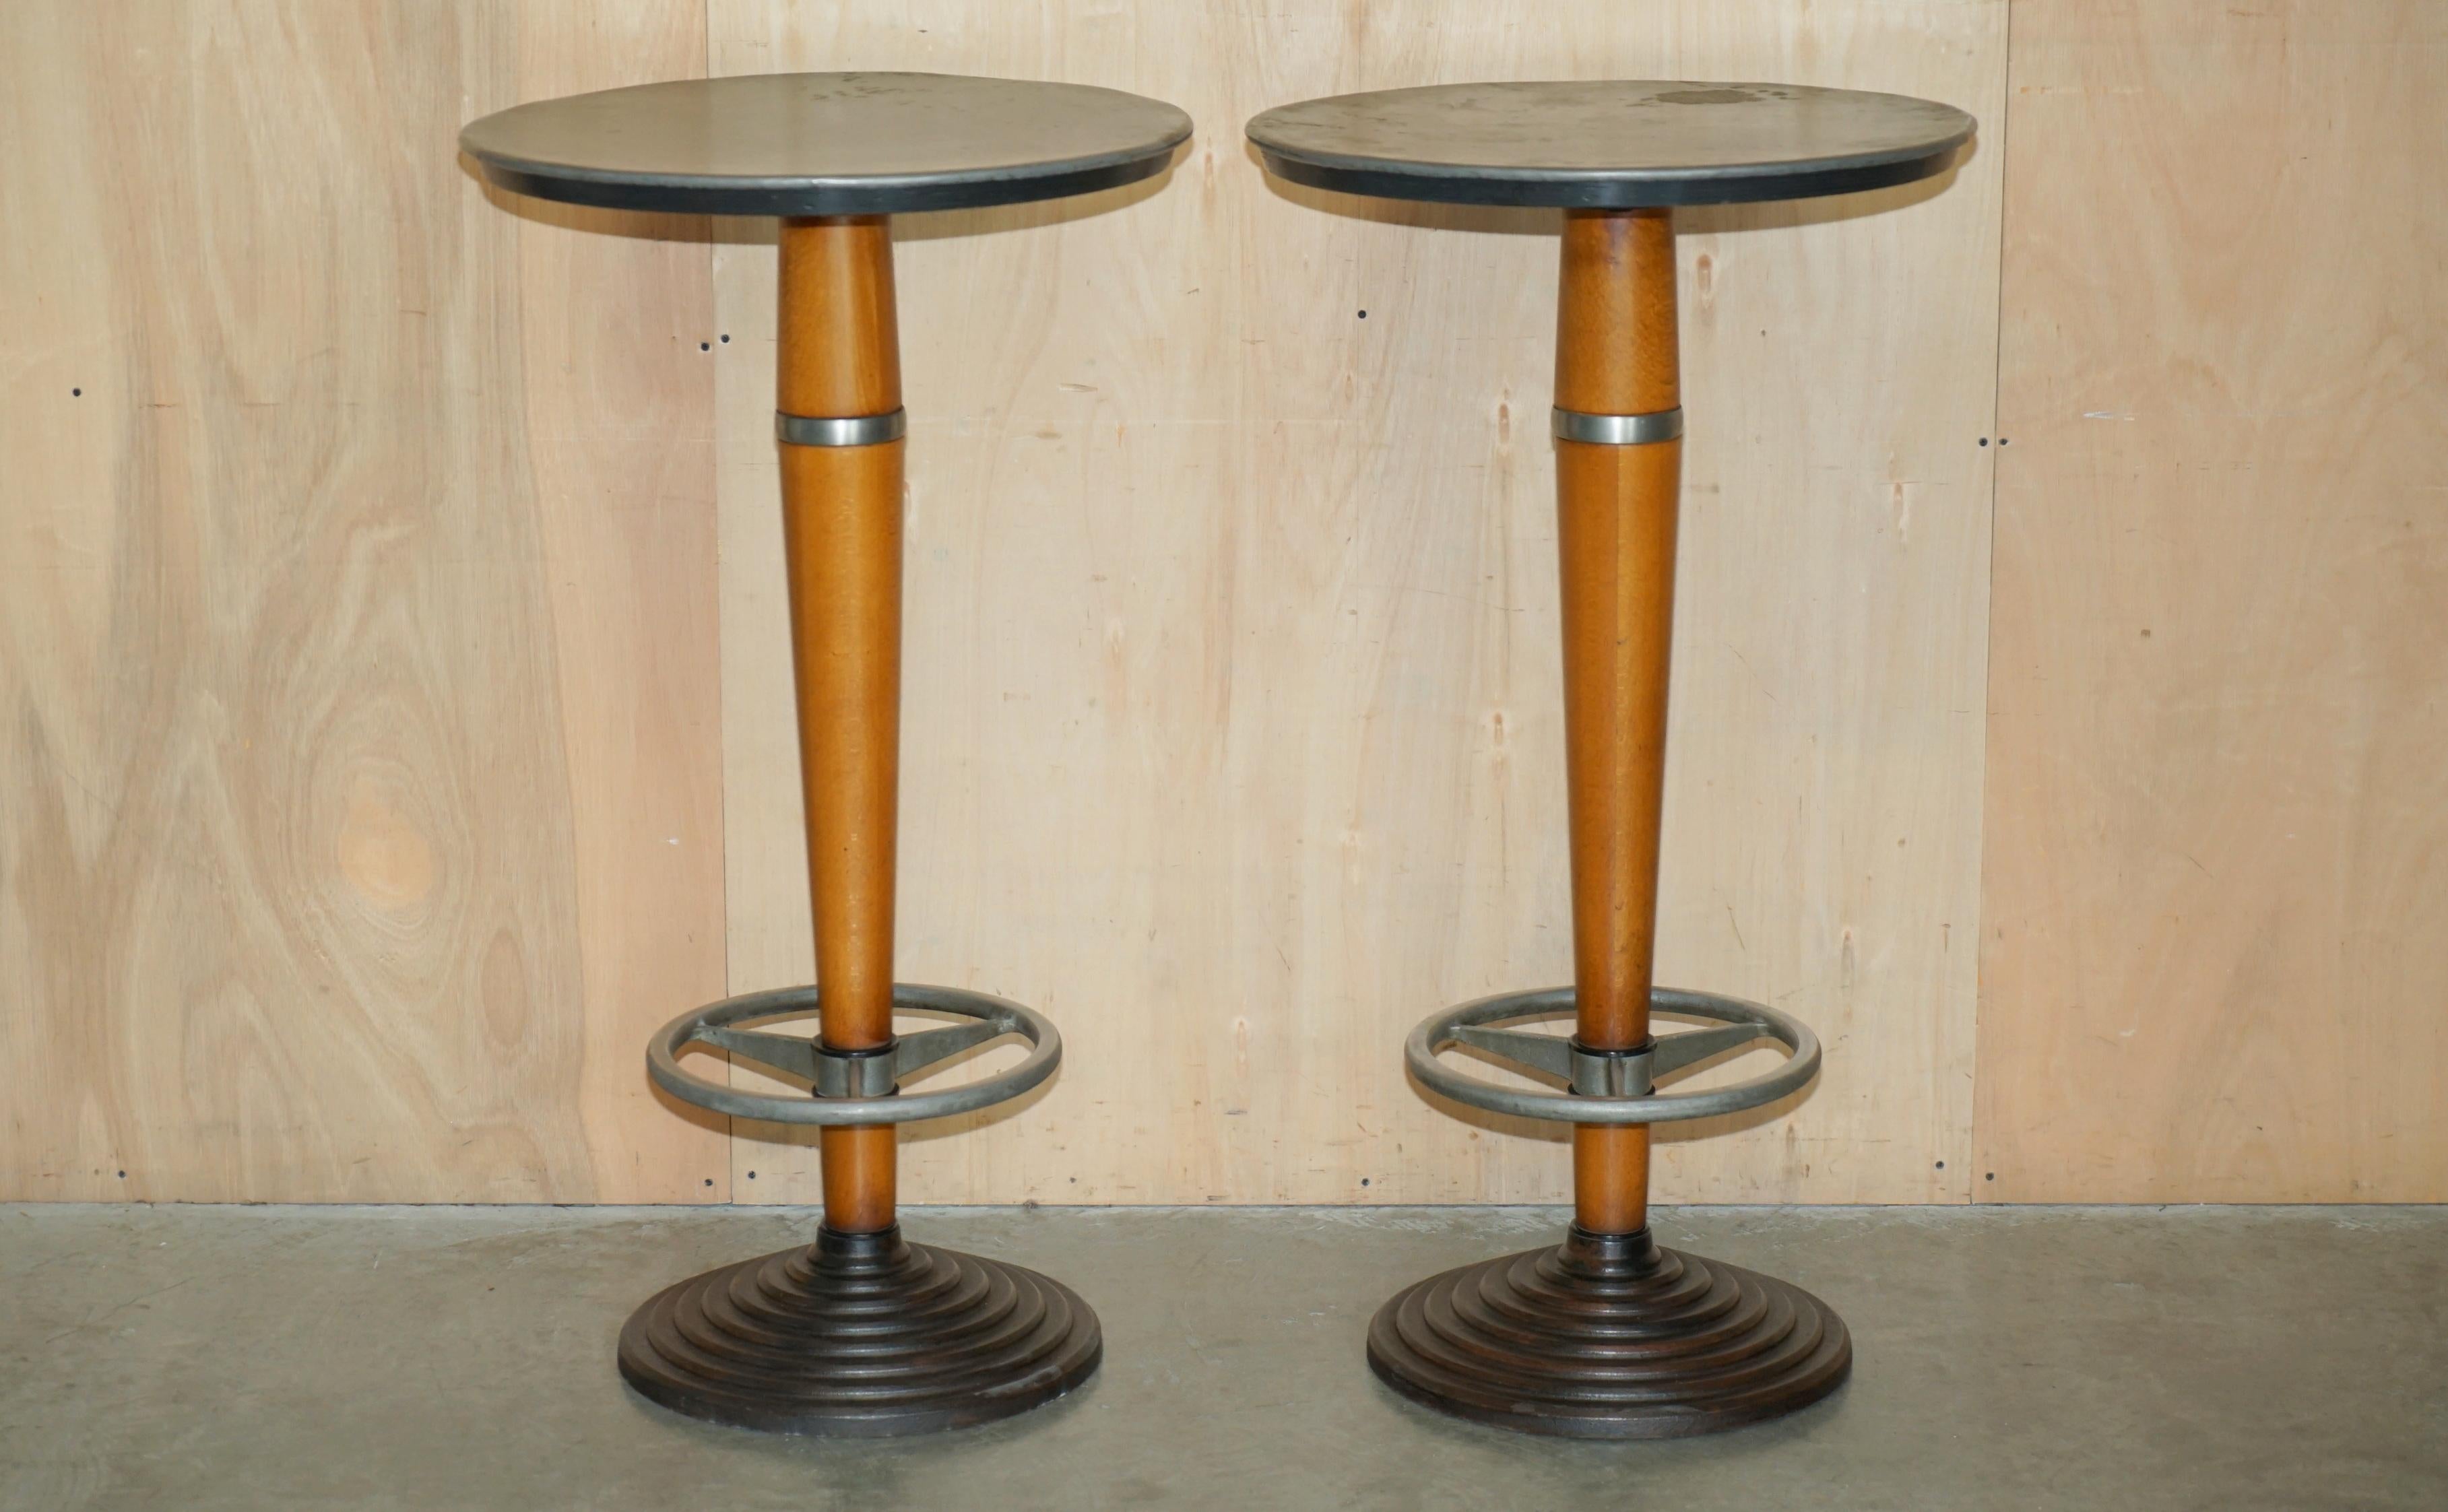 Art Deco 1 OF 2 ANTIQUE ART DECO HIGH BAR TABLE & PAIR OF STOOLS SUITES MUST SEE PICTUREs For Sale